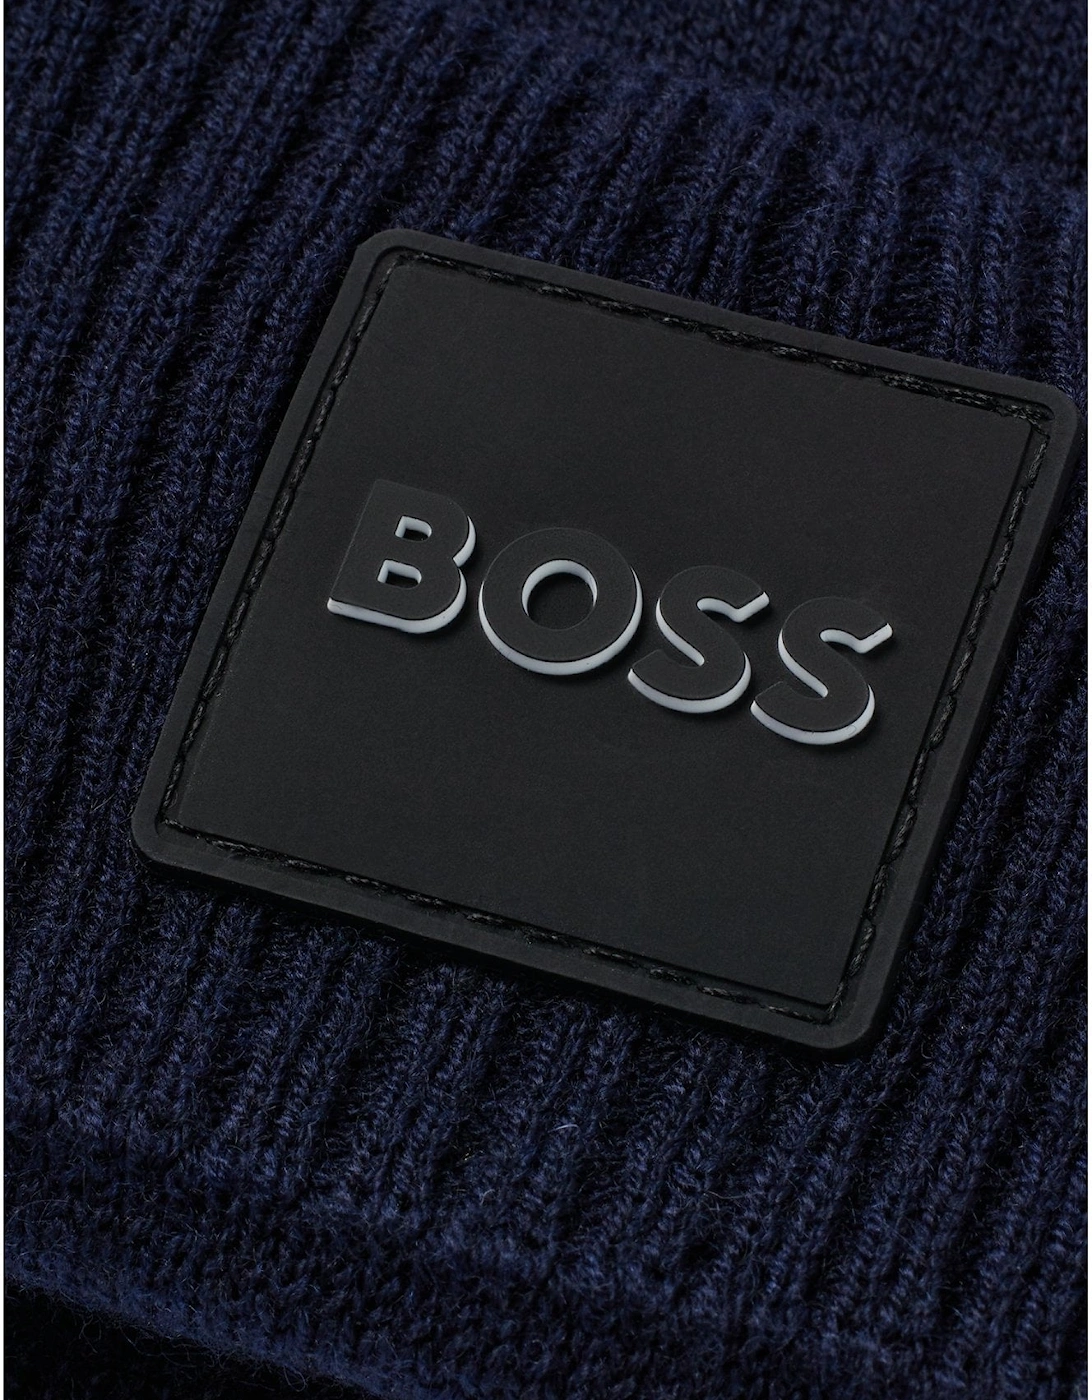 Boy's Navy Blue Knitted Hat.